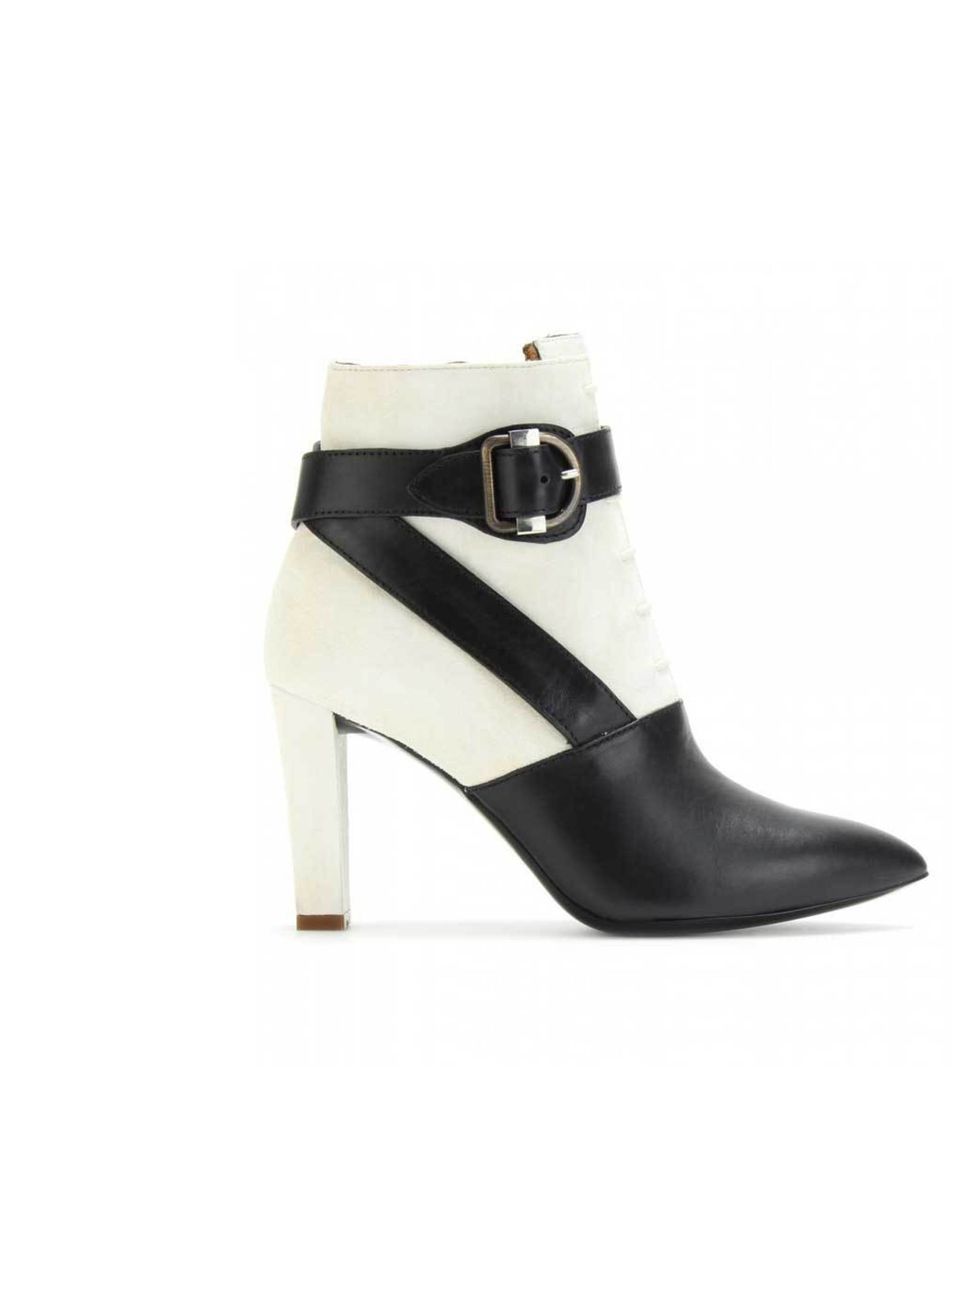 <p>Balenciaga leather lace up ankle boots £725 from <a href="http://www.mytheresa.com/uk_en/leather-lace-up-ankle-boots.html">Mytheresa.com</a></p>